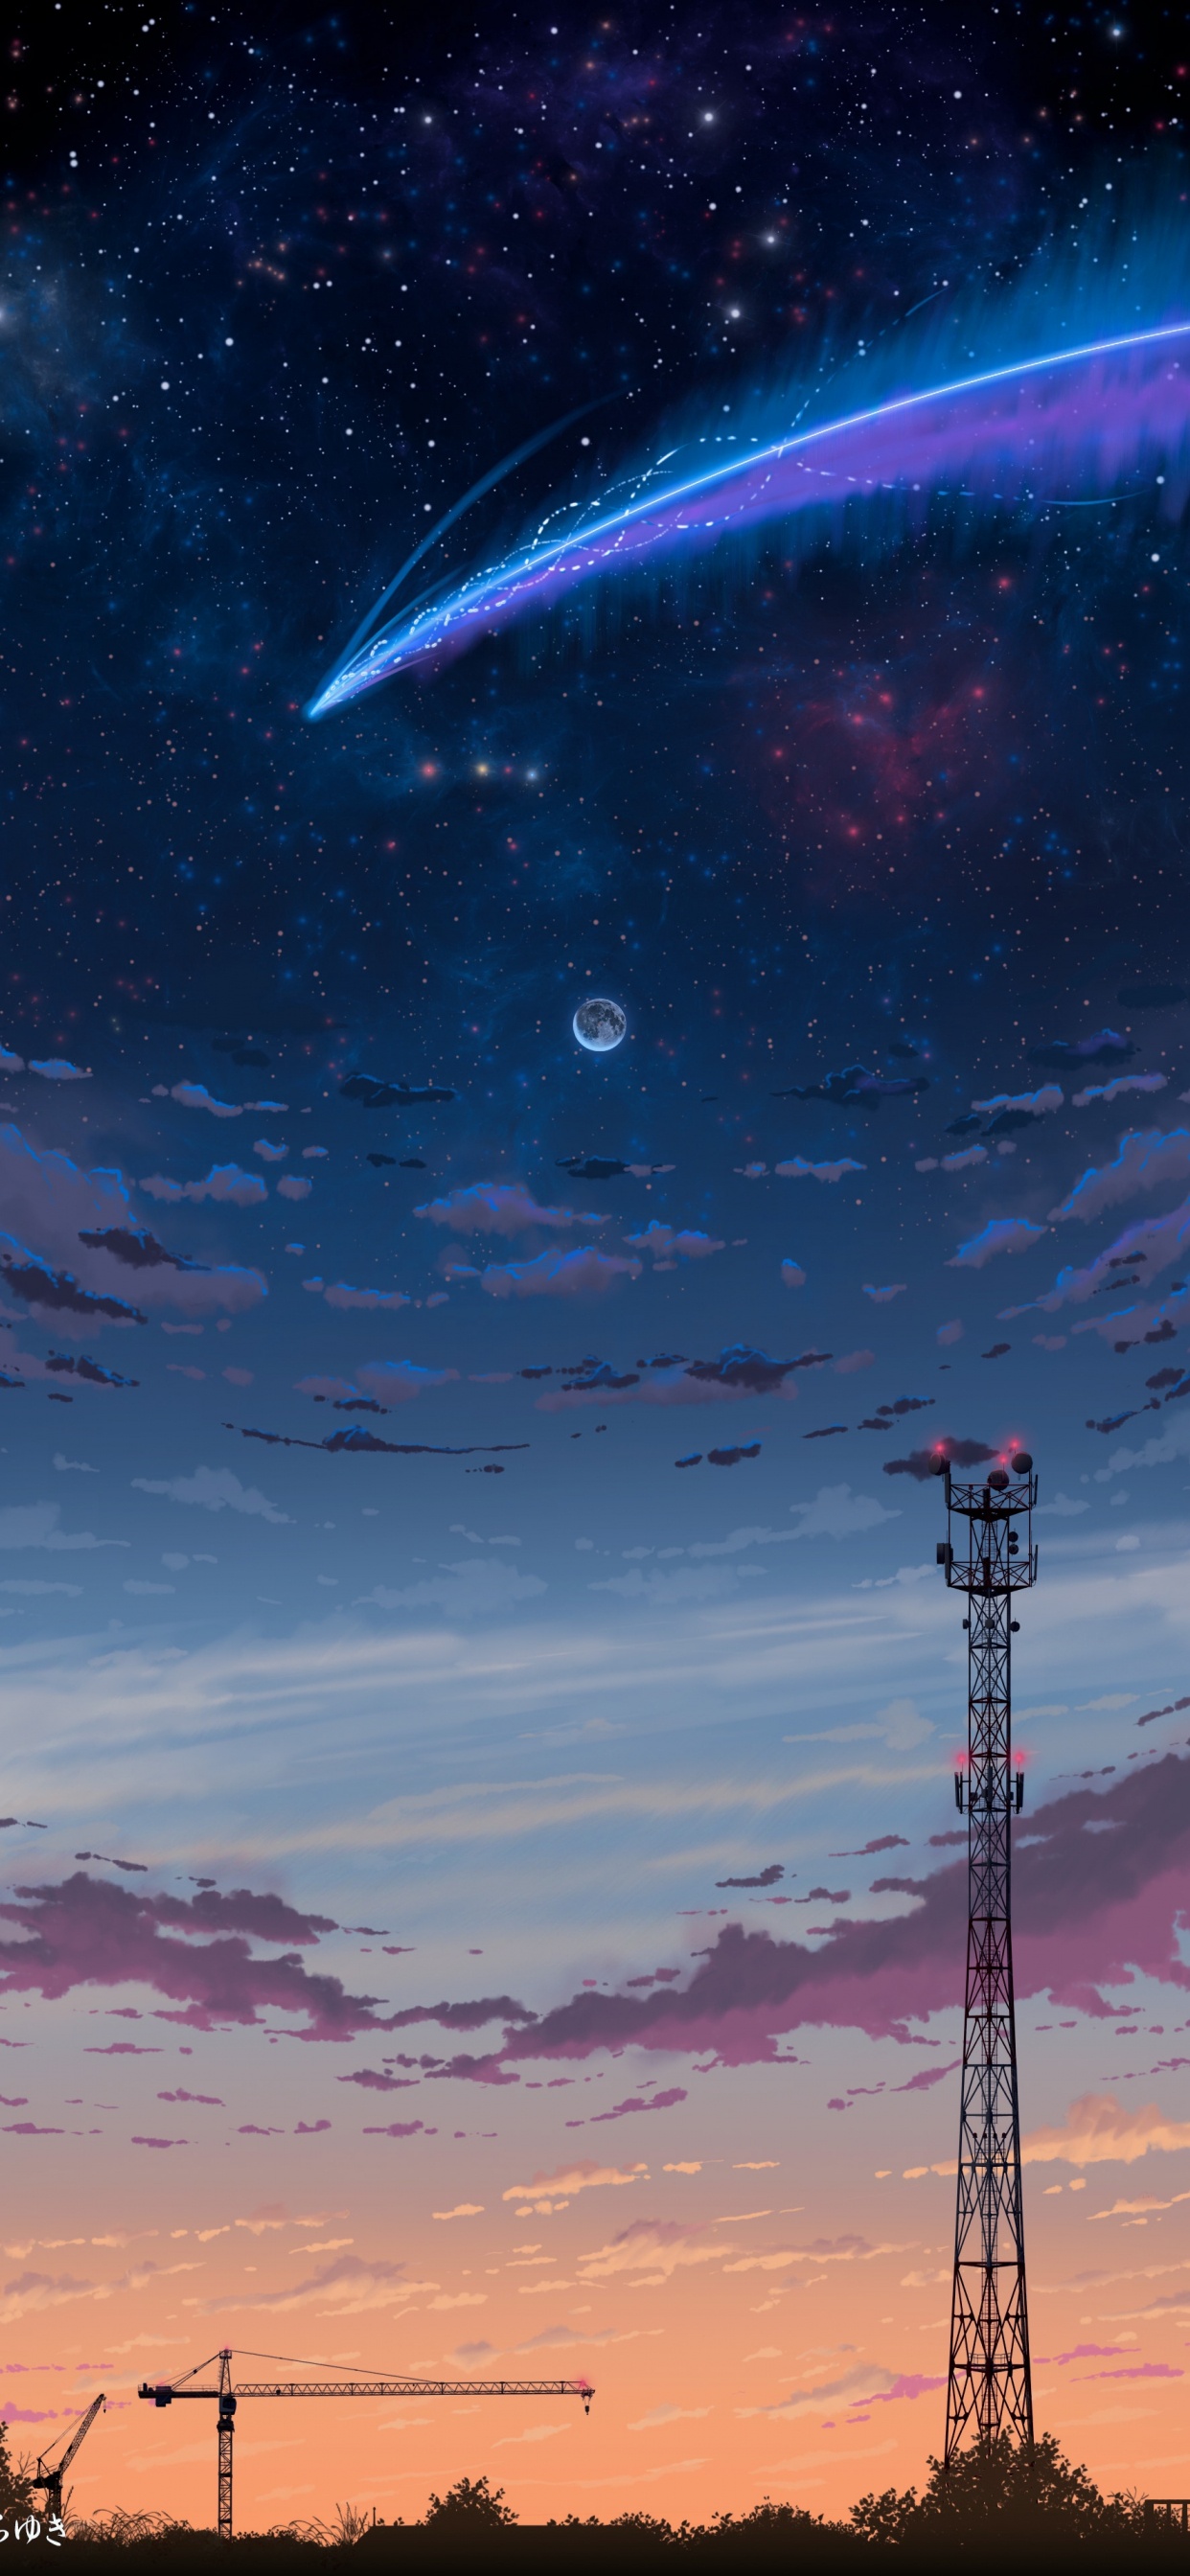 Silhouette of Tower Under Blue Sky With White Clouds During Night Time. Wallpaper in 1242x2688 Resolution